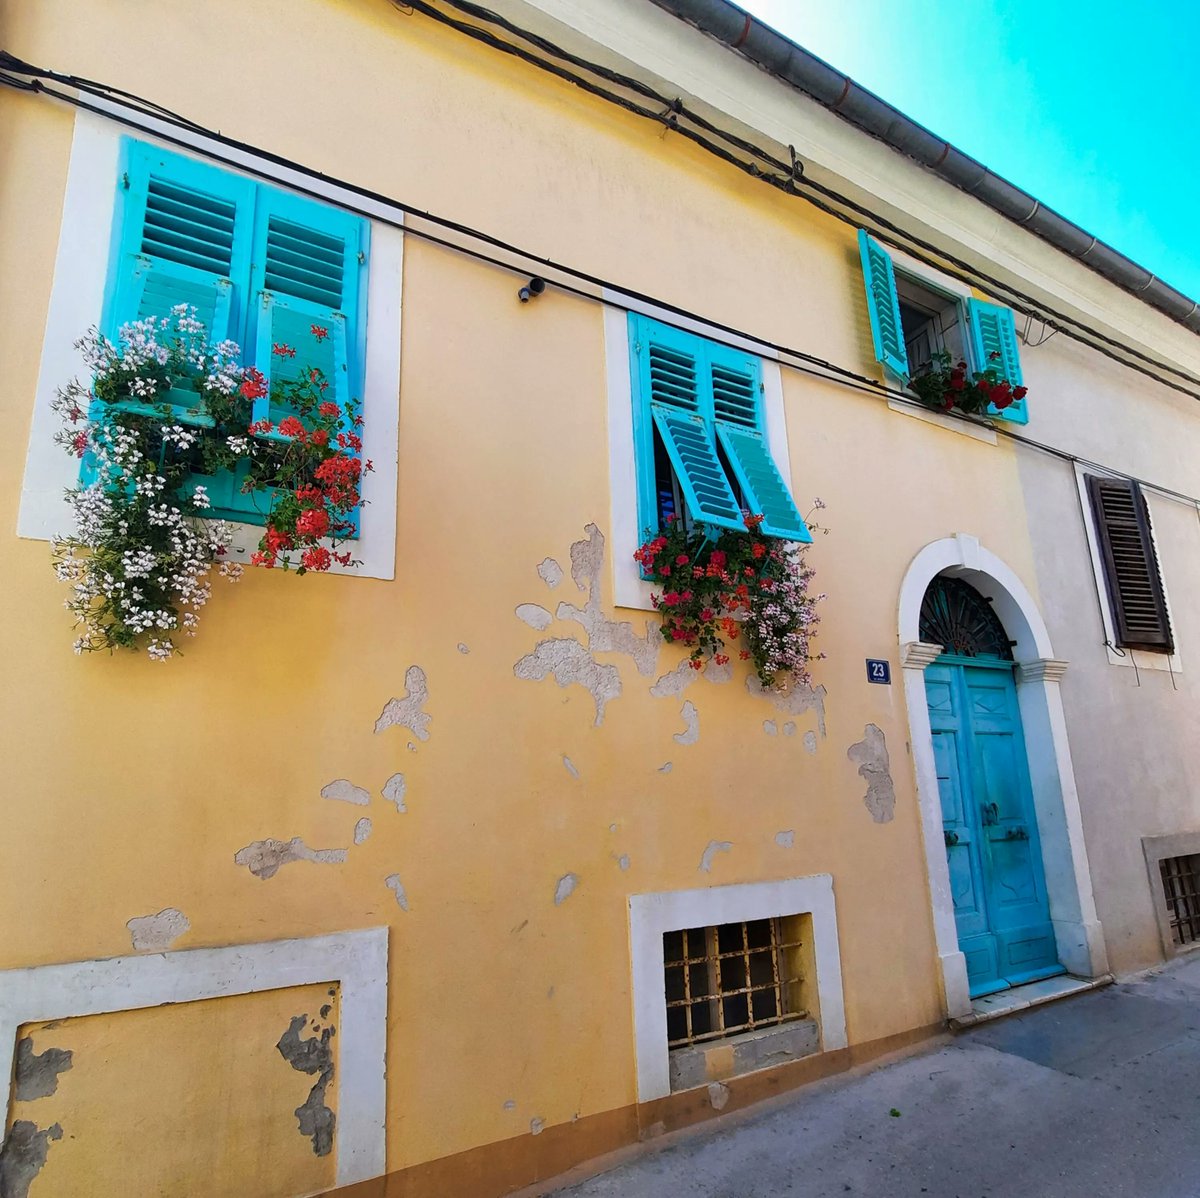 How adorable is this little house? Mali Lošinj is known as the 'Island of Vitality'. Everywhere, colours, scents & sounds reflect this. #DESTIMEDPLUS #MEETExperiences #MEETTrips2022 #golosinj #rhythmofsenses #natura2000 #go2losinj @MedEcotourism @IUCN_Med @aslagency